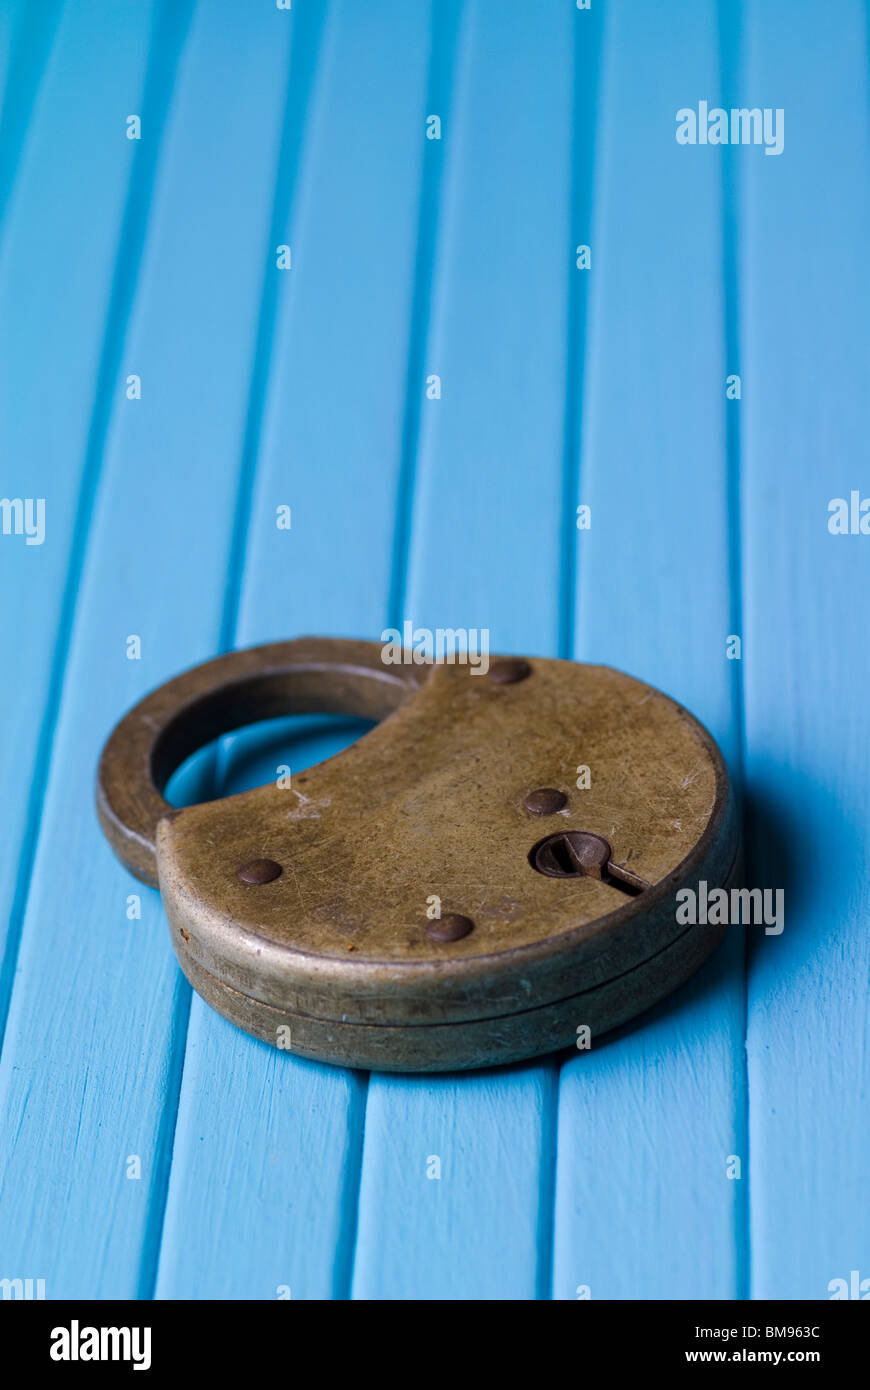 Old fashioned padlock on a blue wooden background Stock Photo